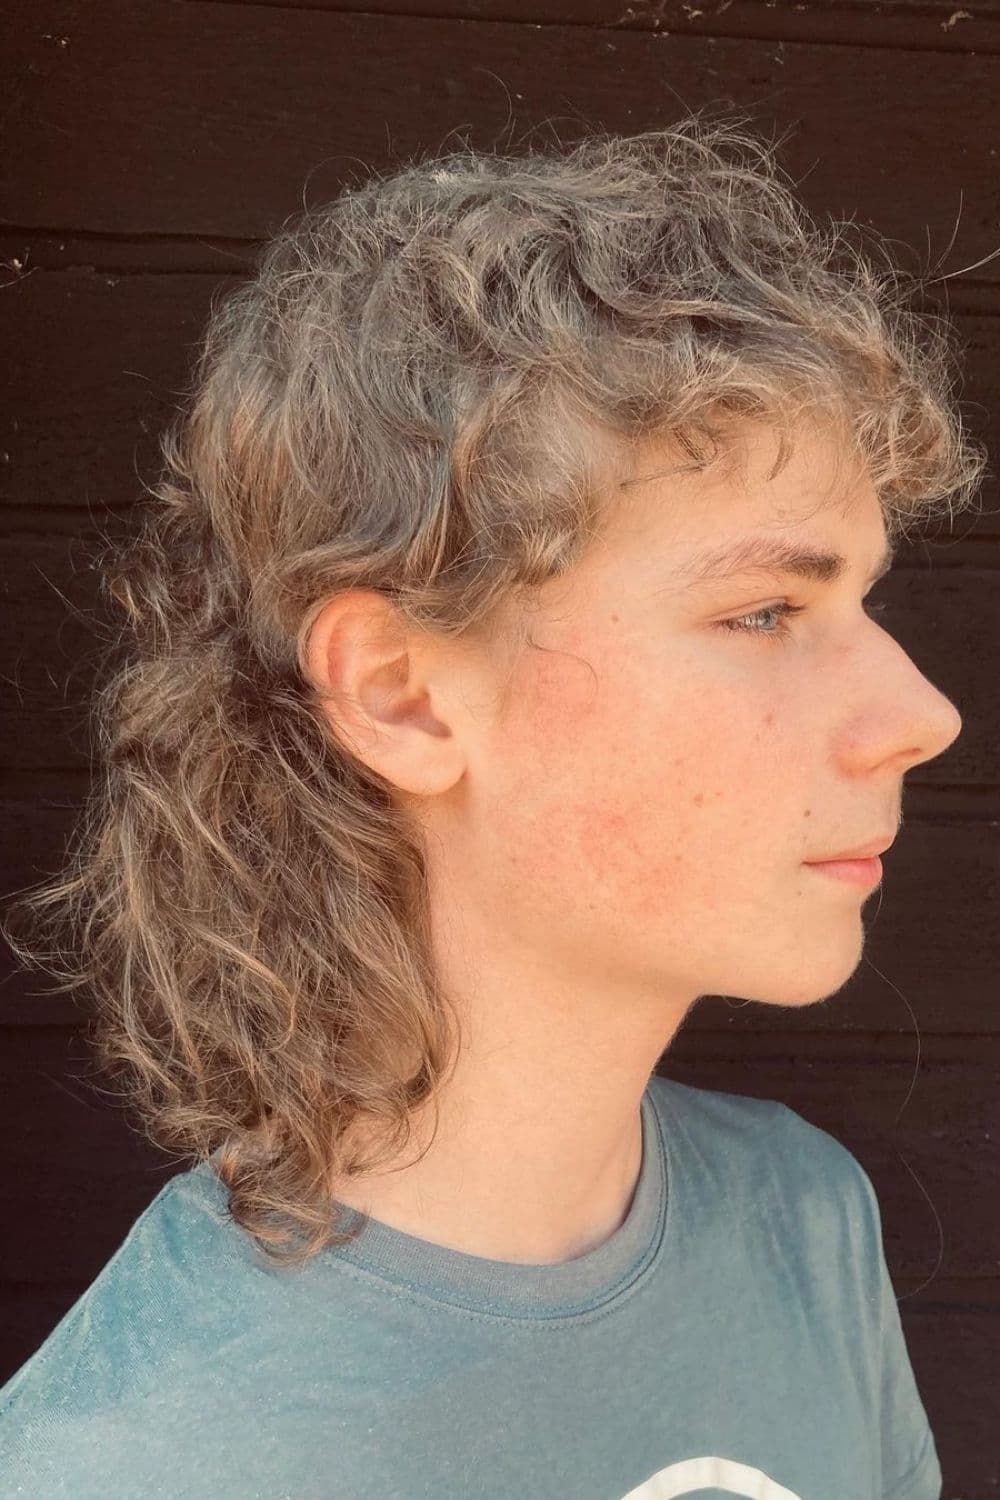 Side view of a man with shaggy curly mullet.